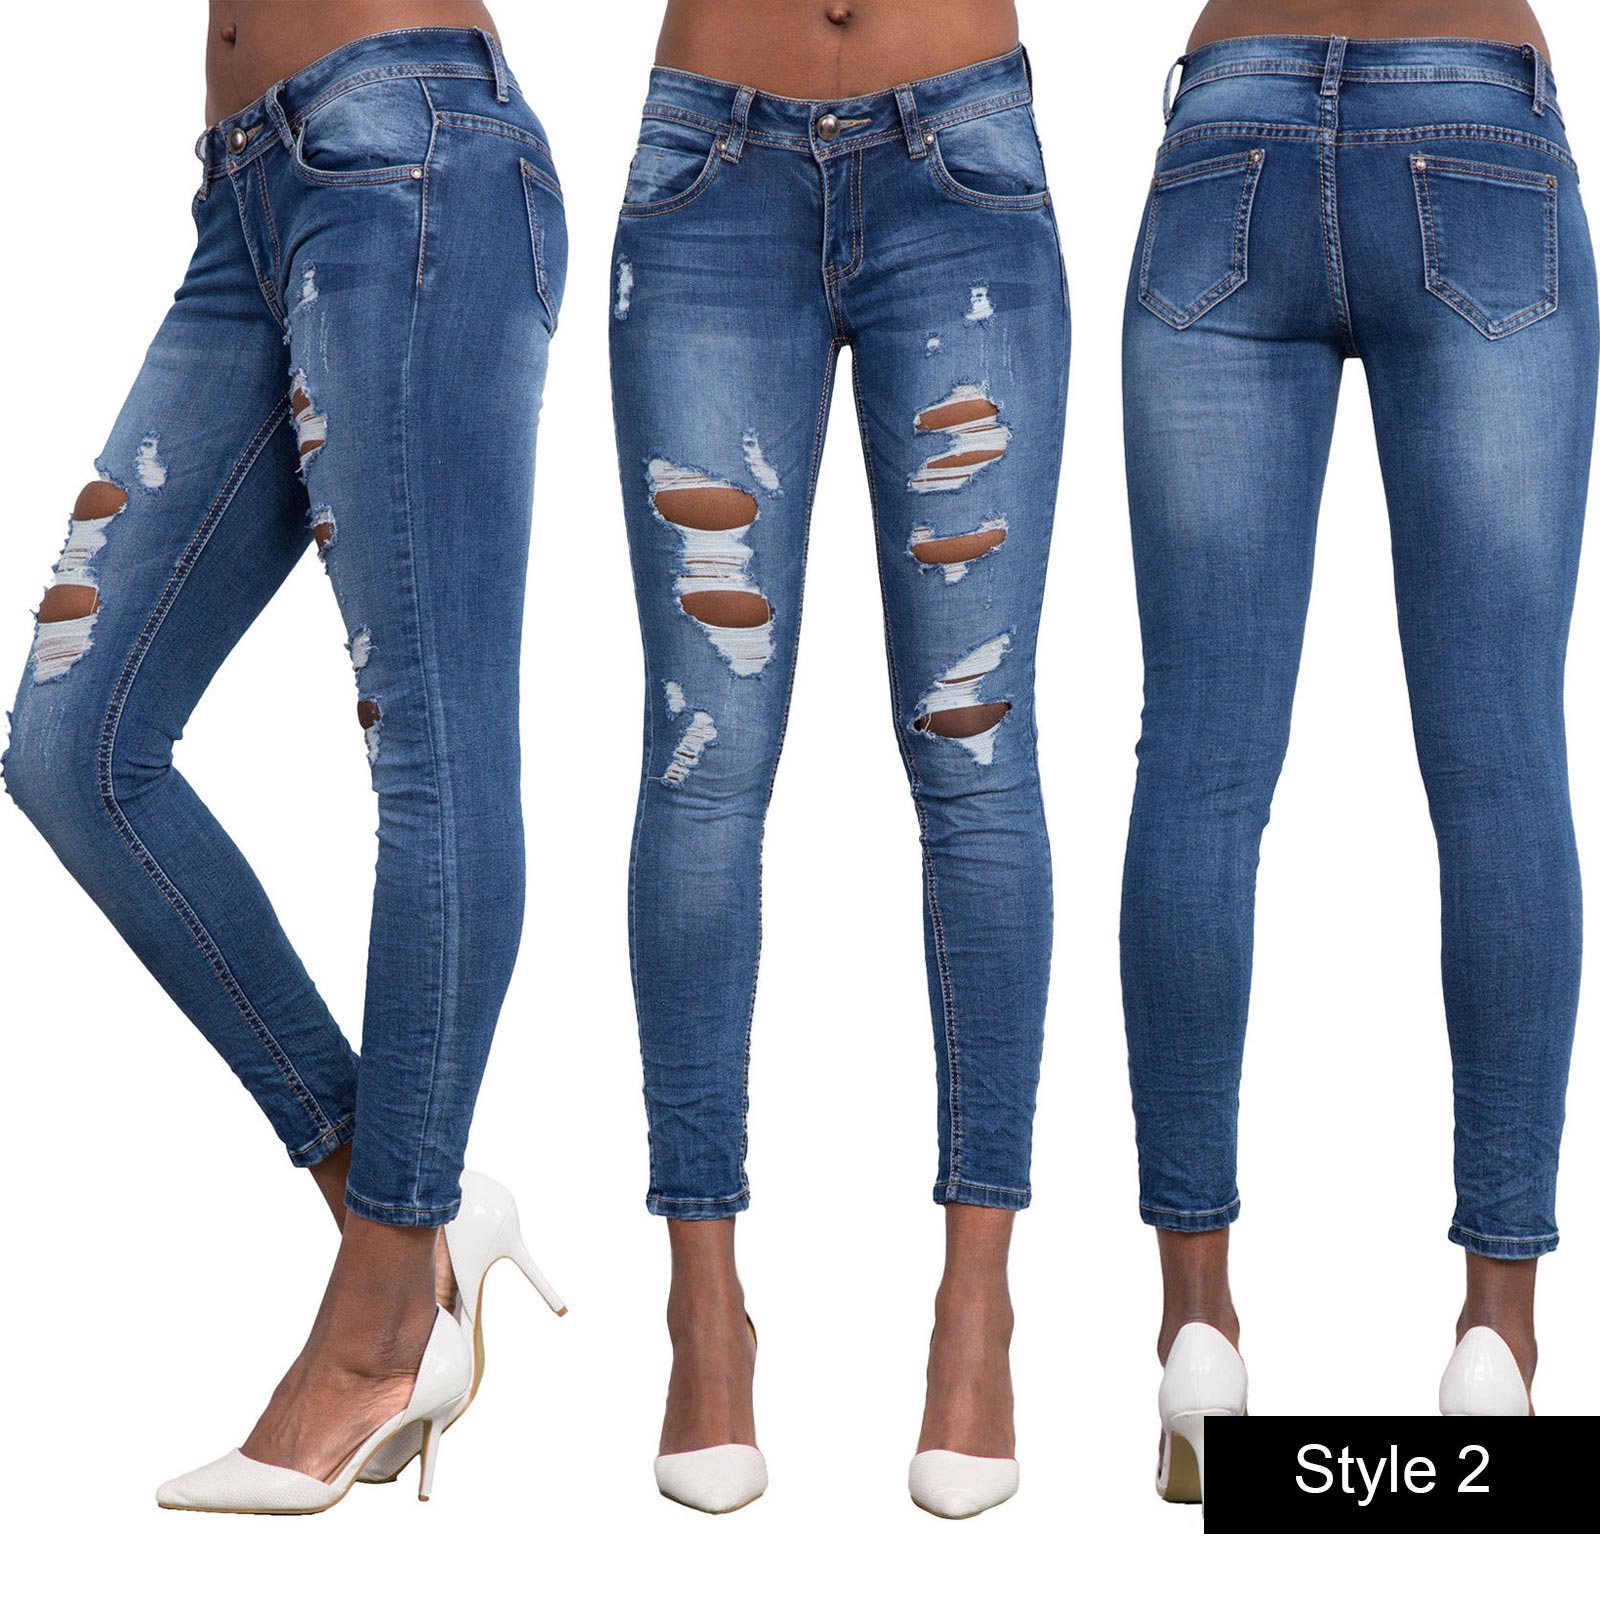 Women Ladies Sexy Stretch Faded Ripped Skinny Fit Denim Jeans Size 6 8 ...